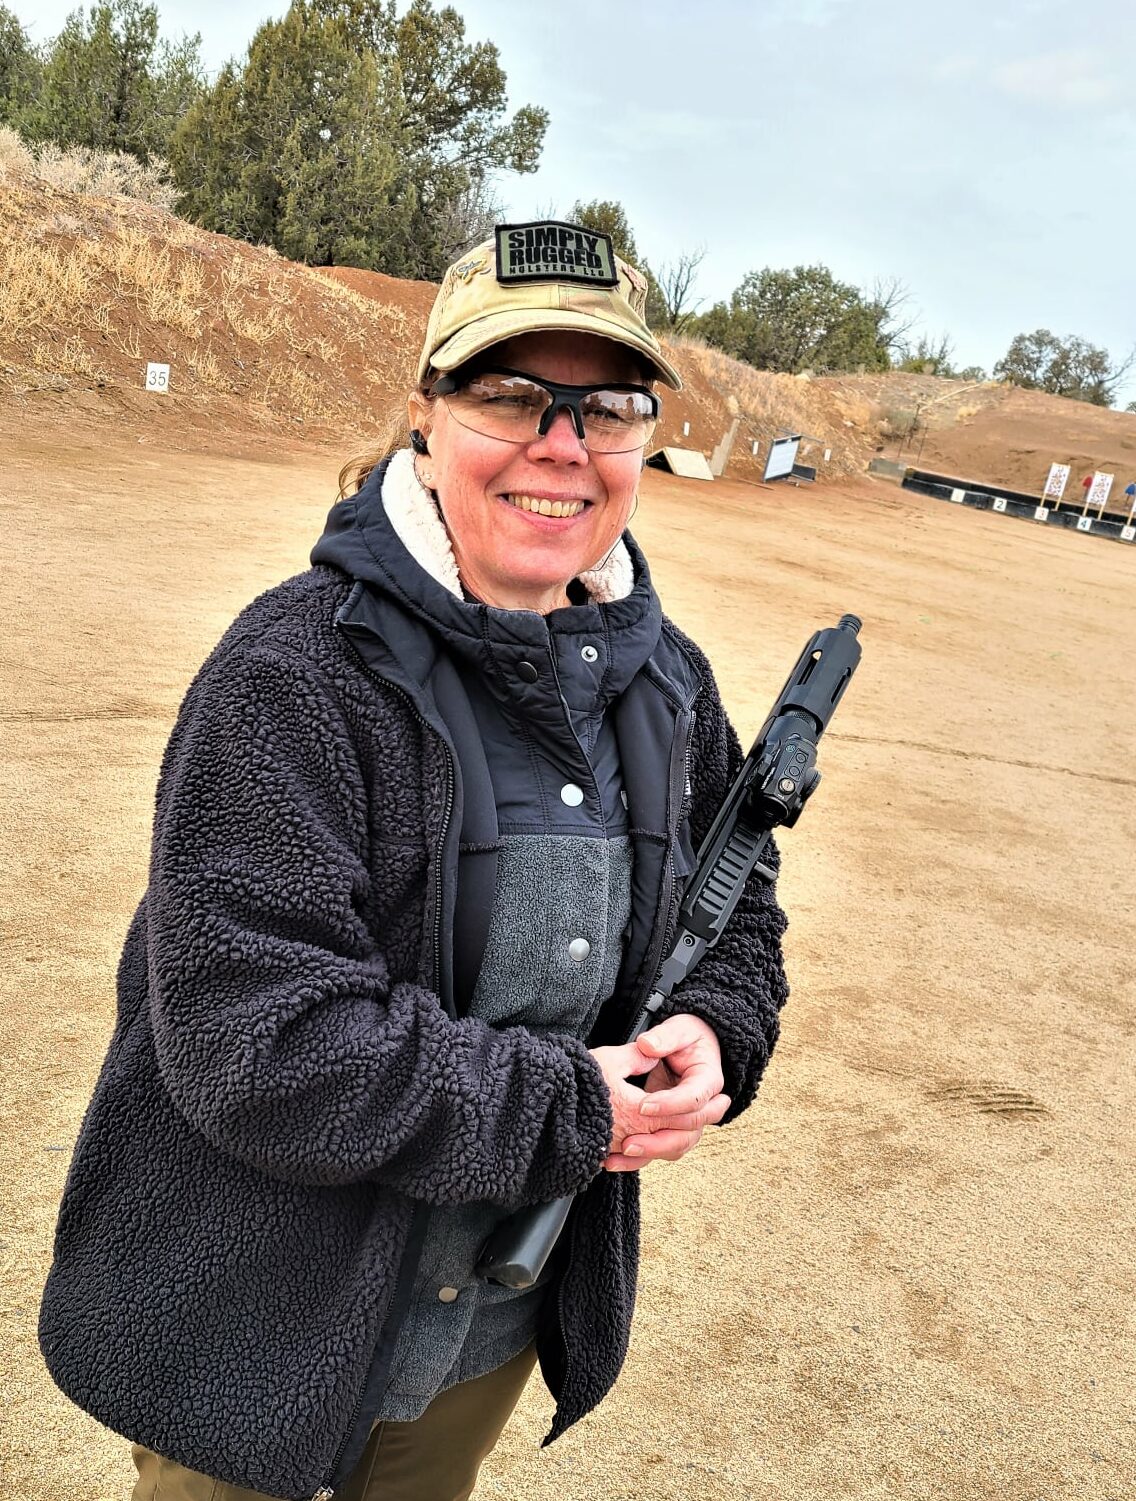 Jan at Gunsite with her Ruger PC Charger